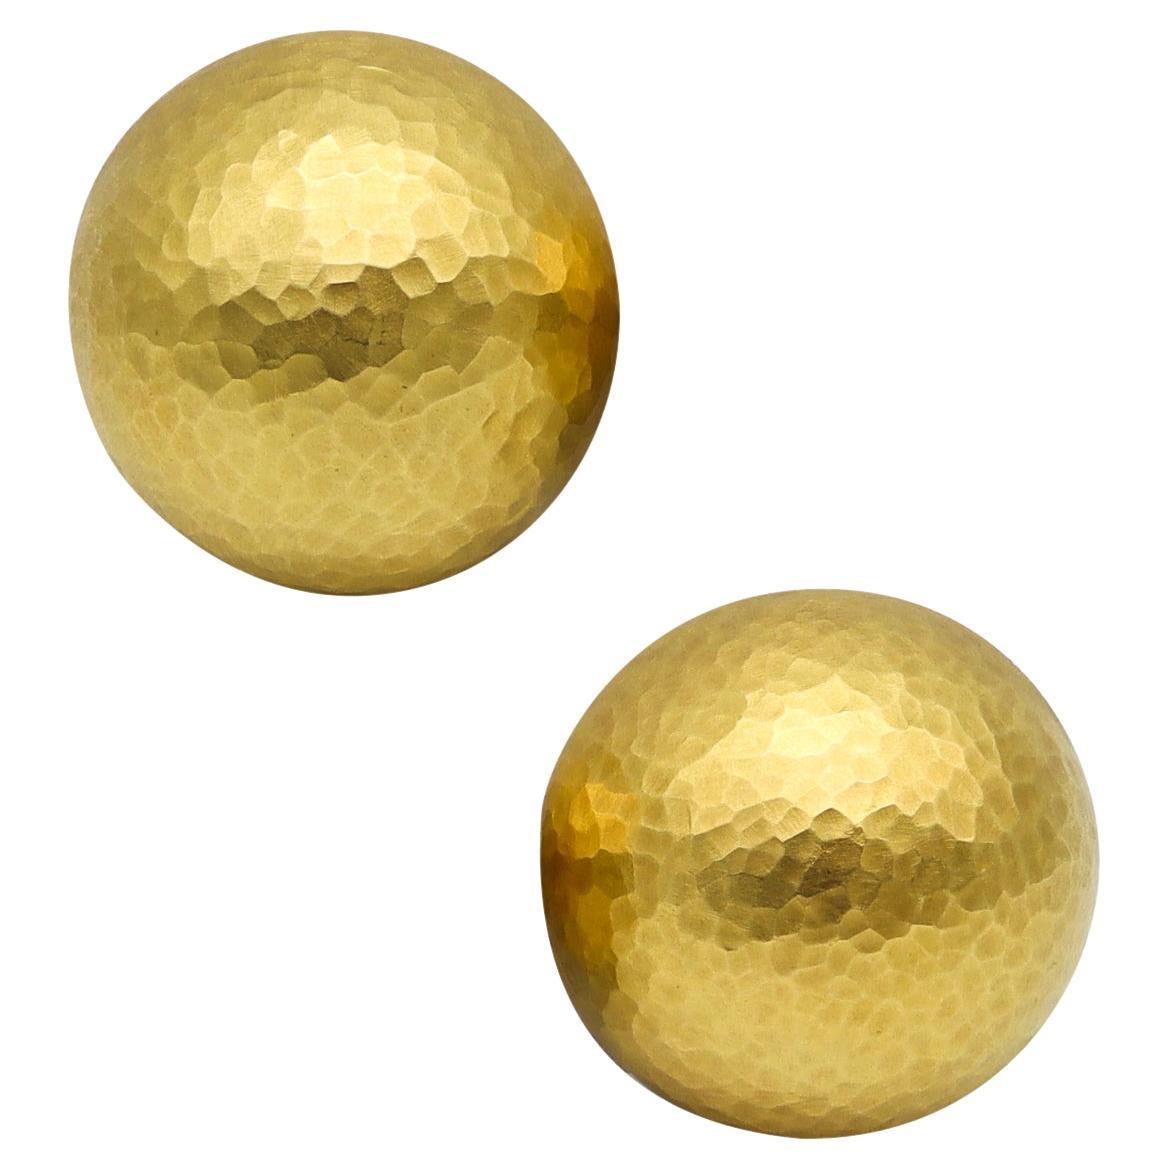 Tiffany & Co. by Paloma Picasso Pair of Domed Earrings in Hammered 18 Karat Gold